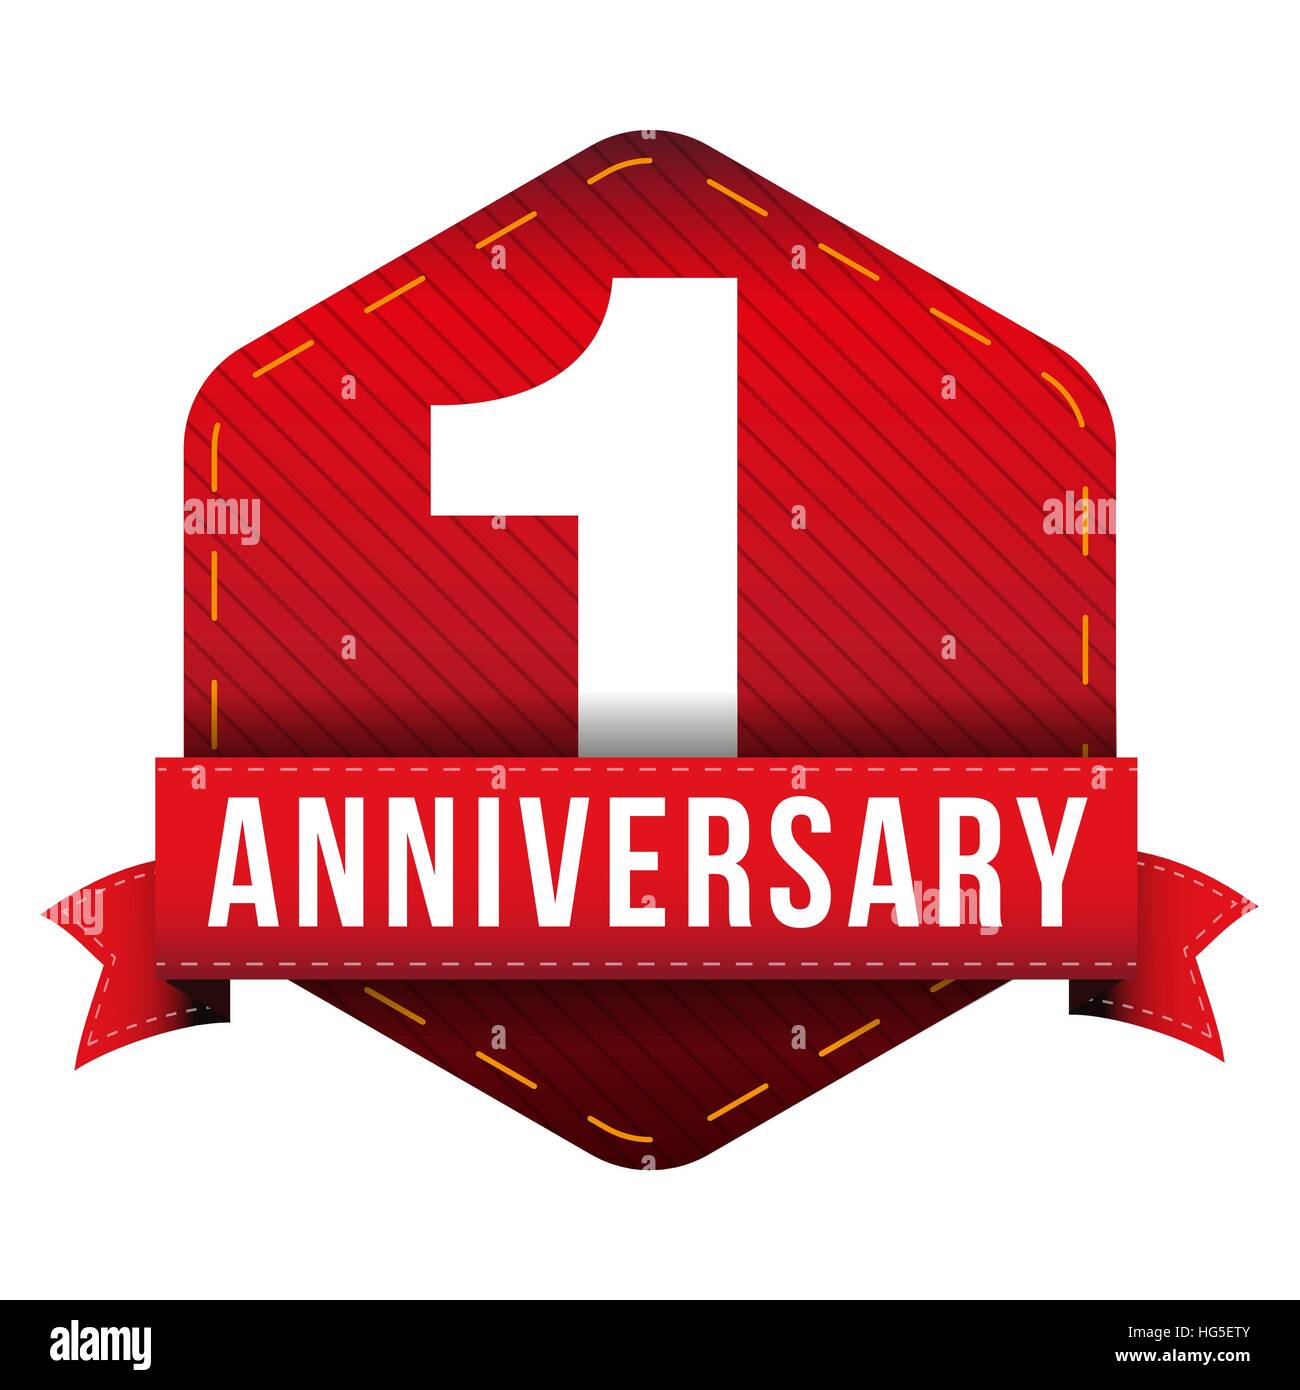 1 year logo Stock Vector Images - Alamy